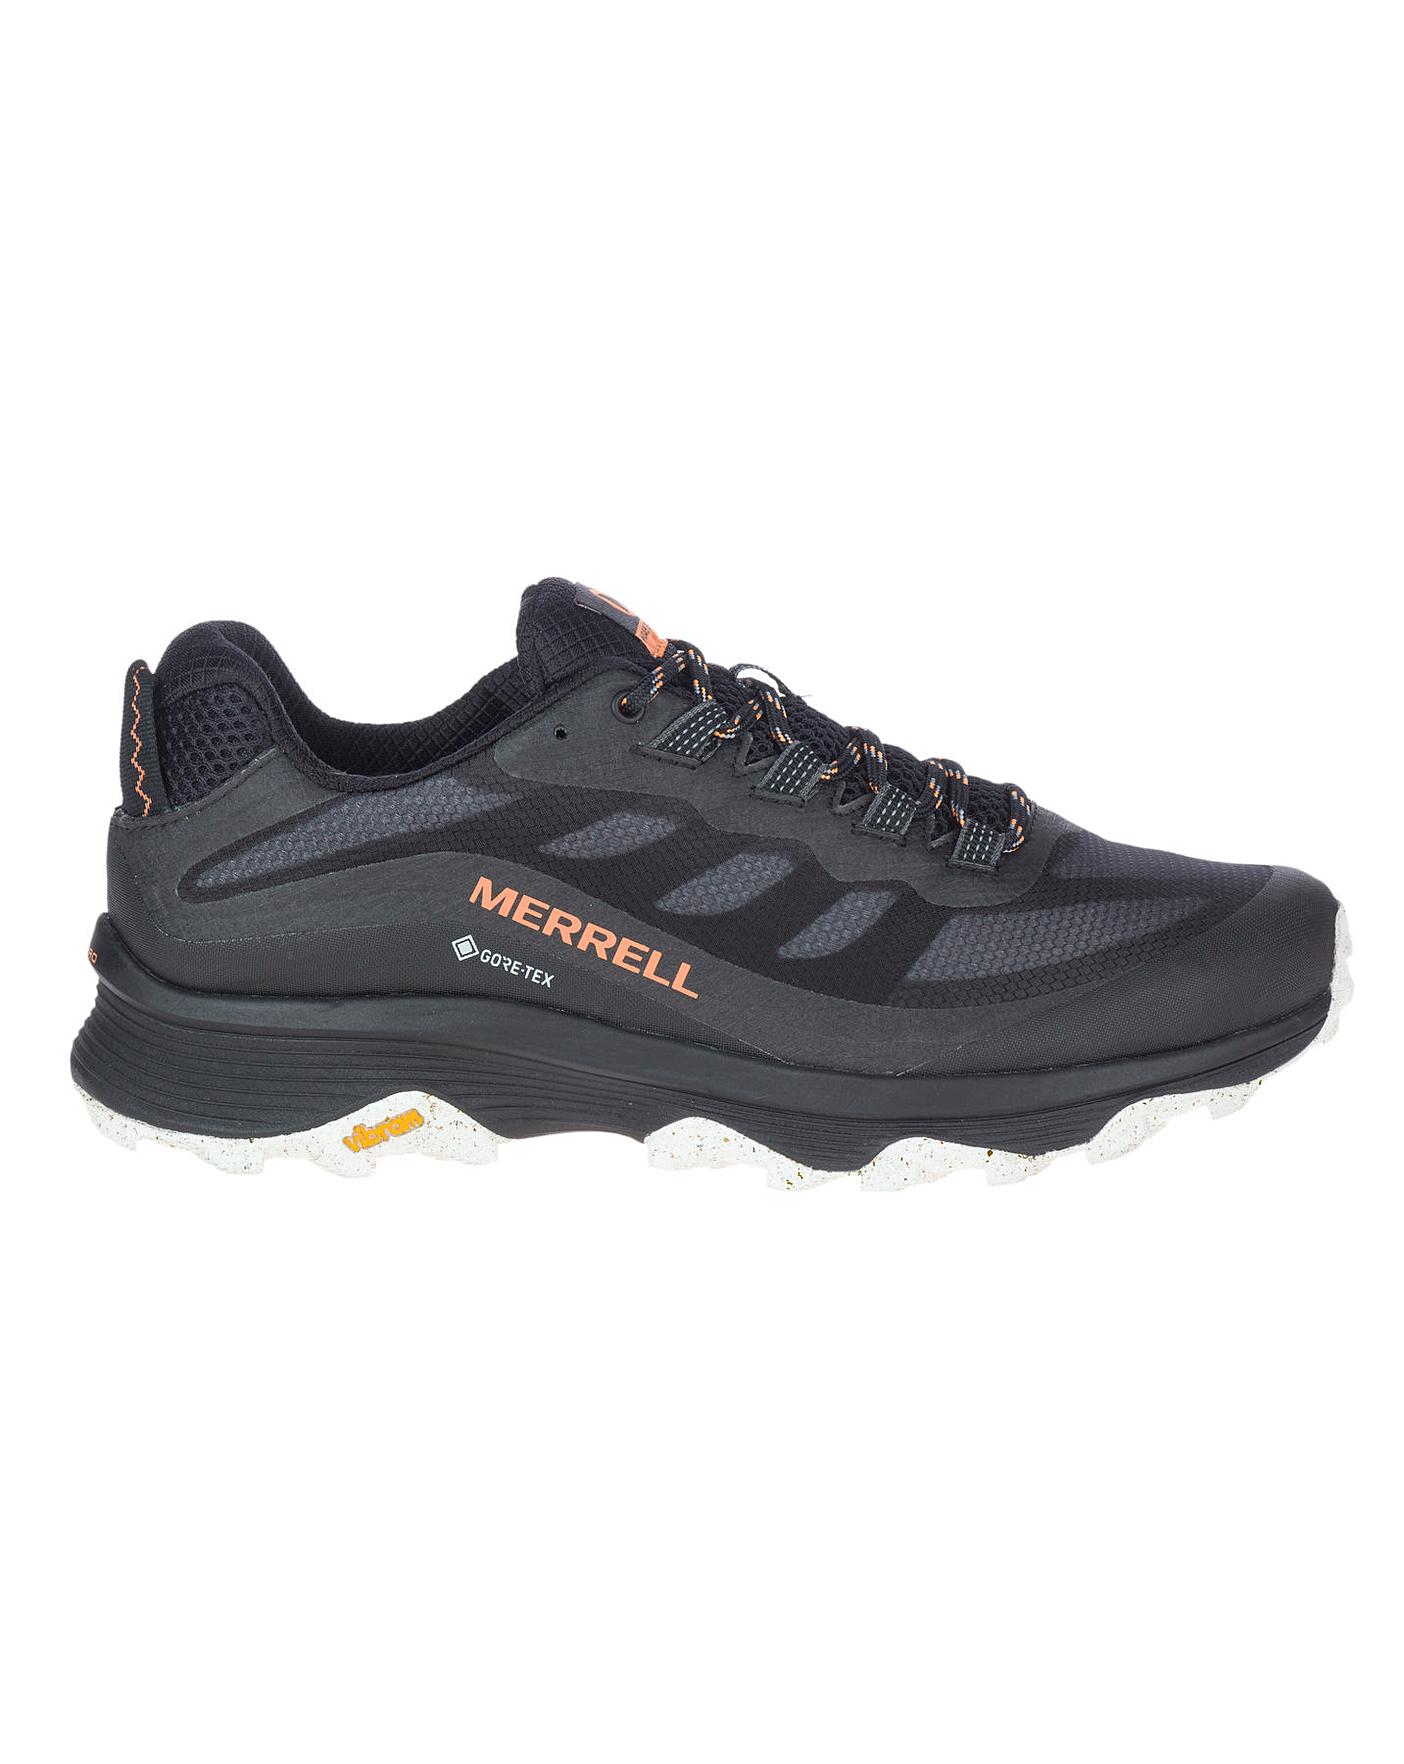 Moab Speed GTX Shoes